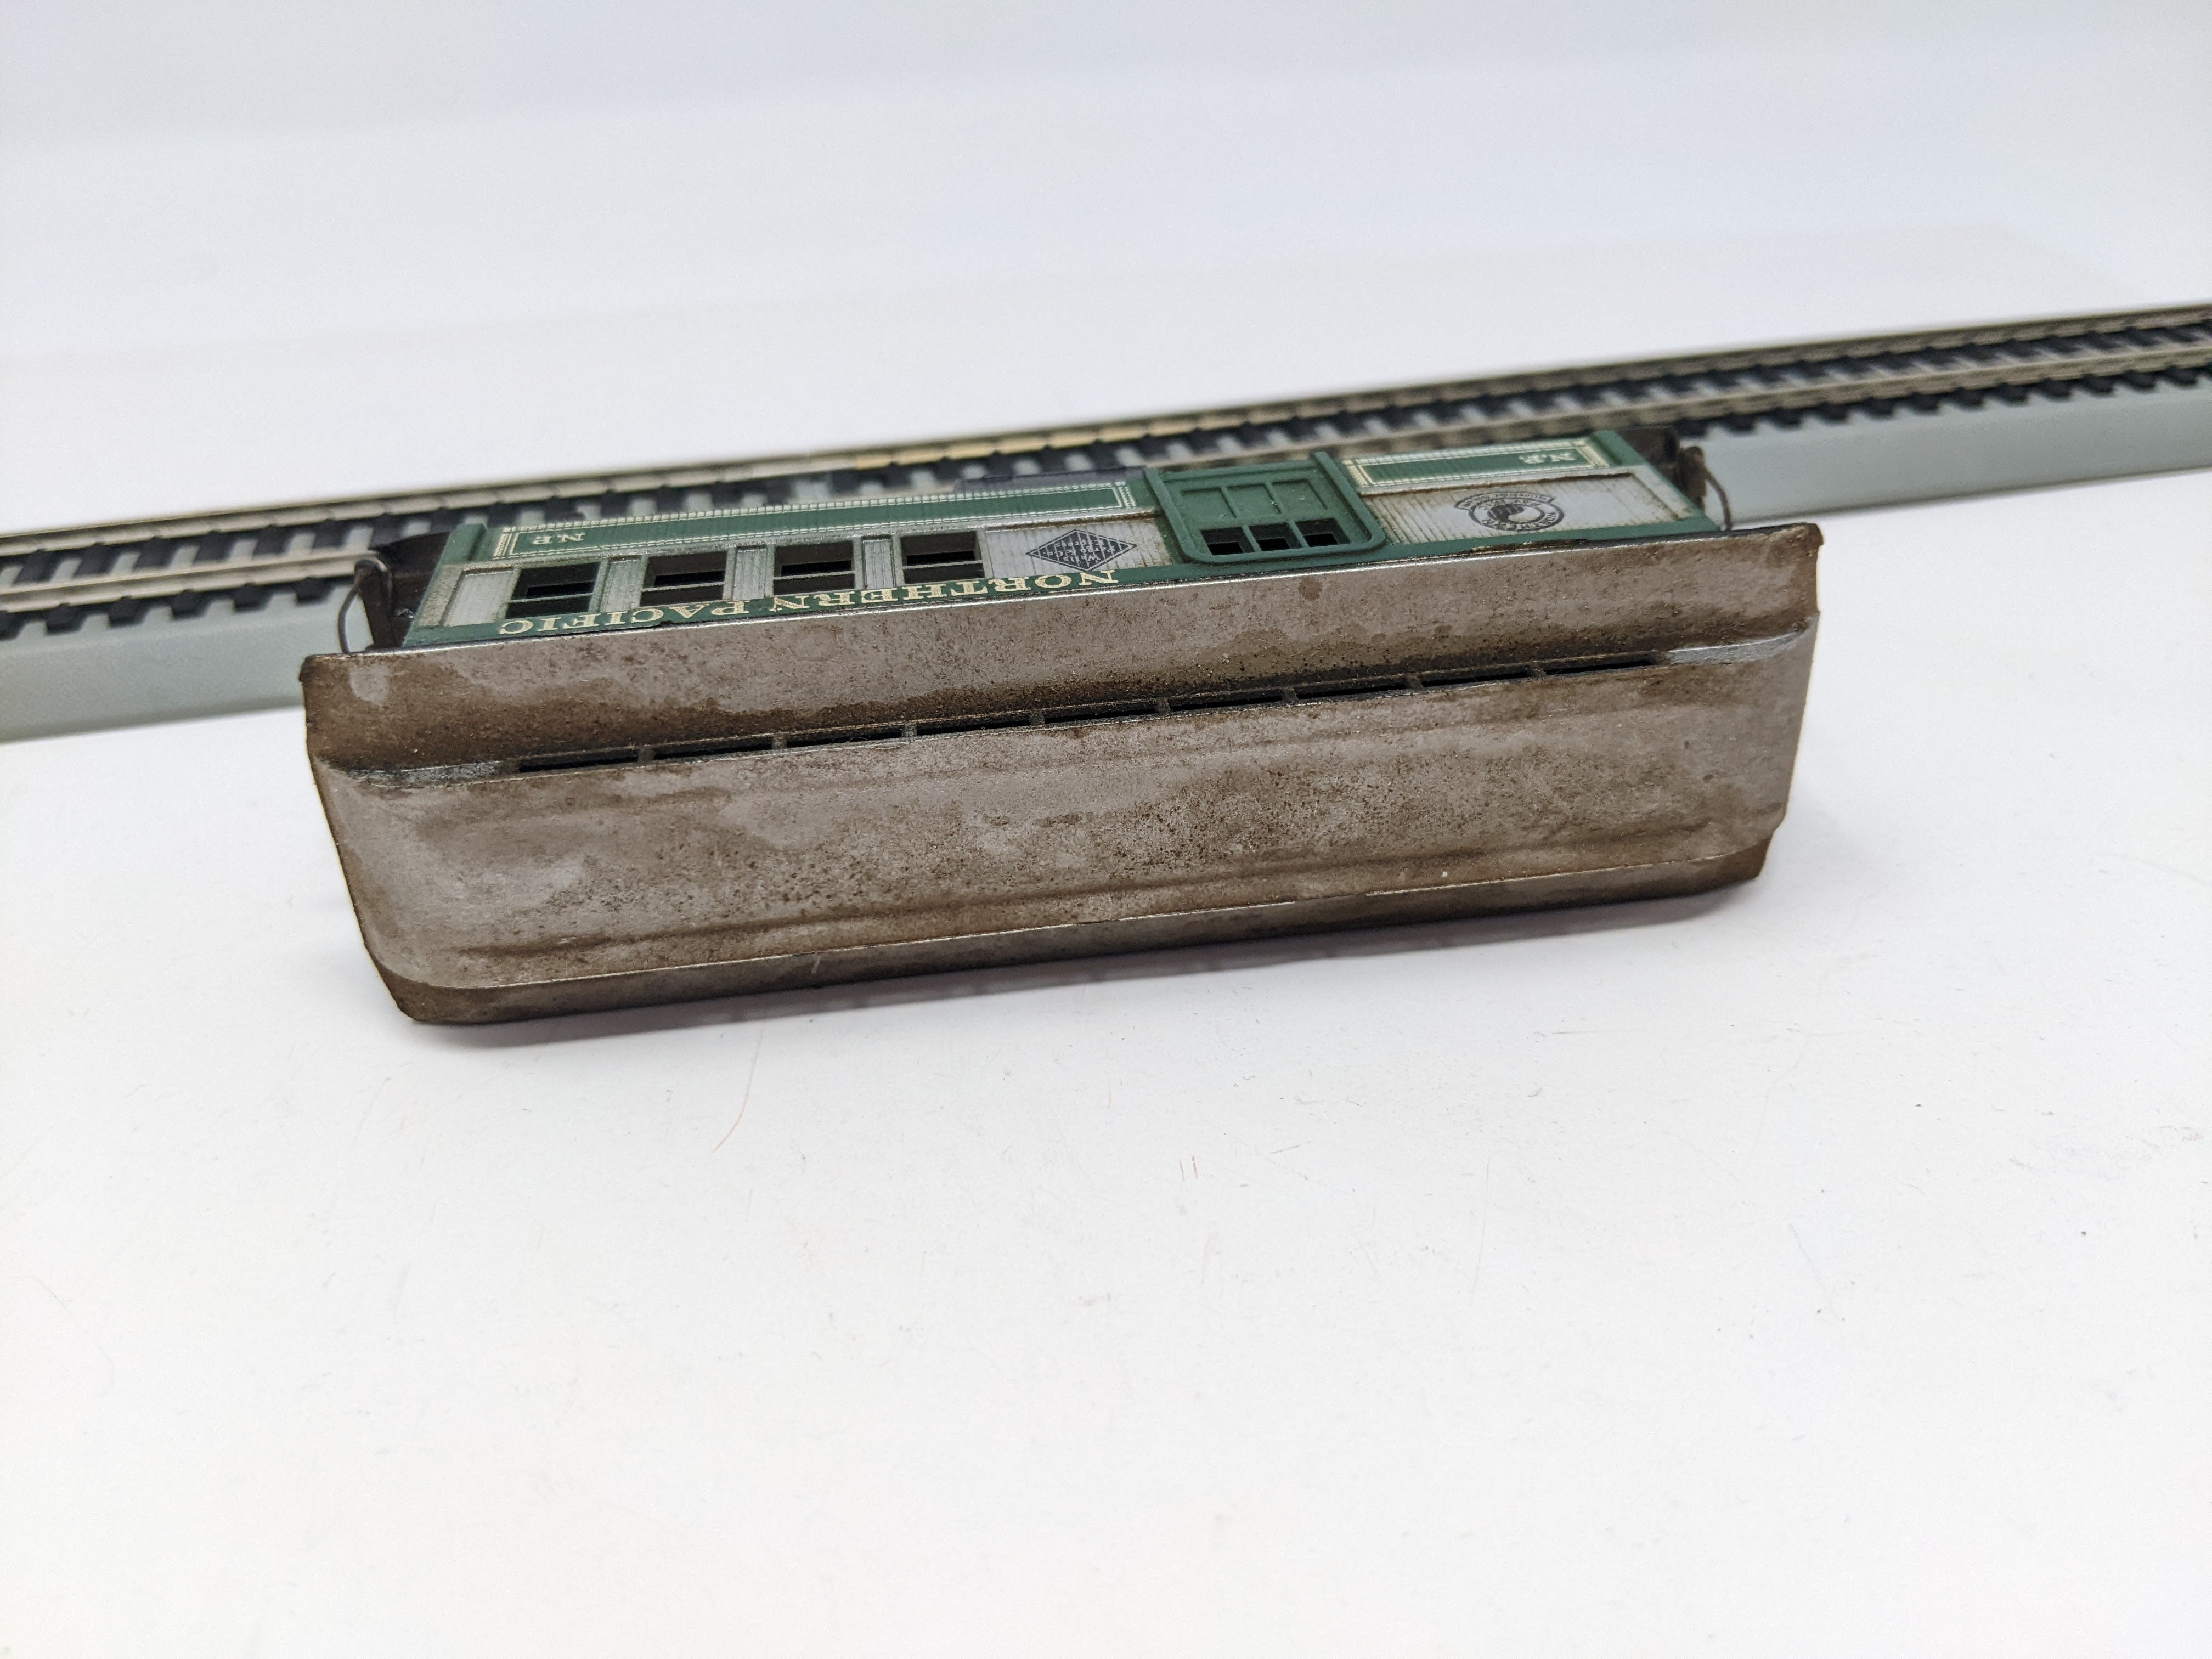 USED HO Scale, 30' Old Time Combine Passenger Car, Northern Pacific NP , Read Description